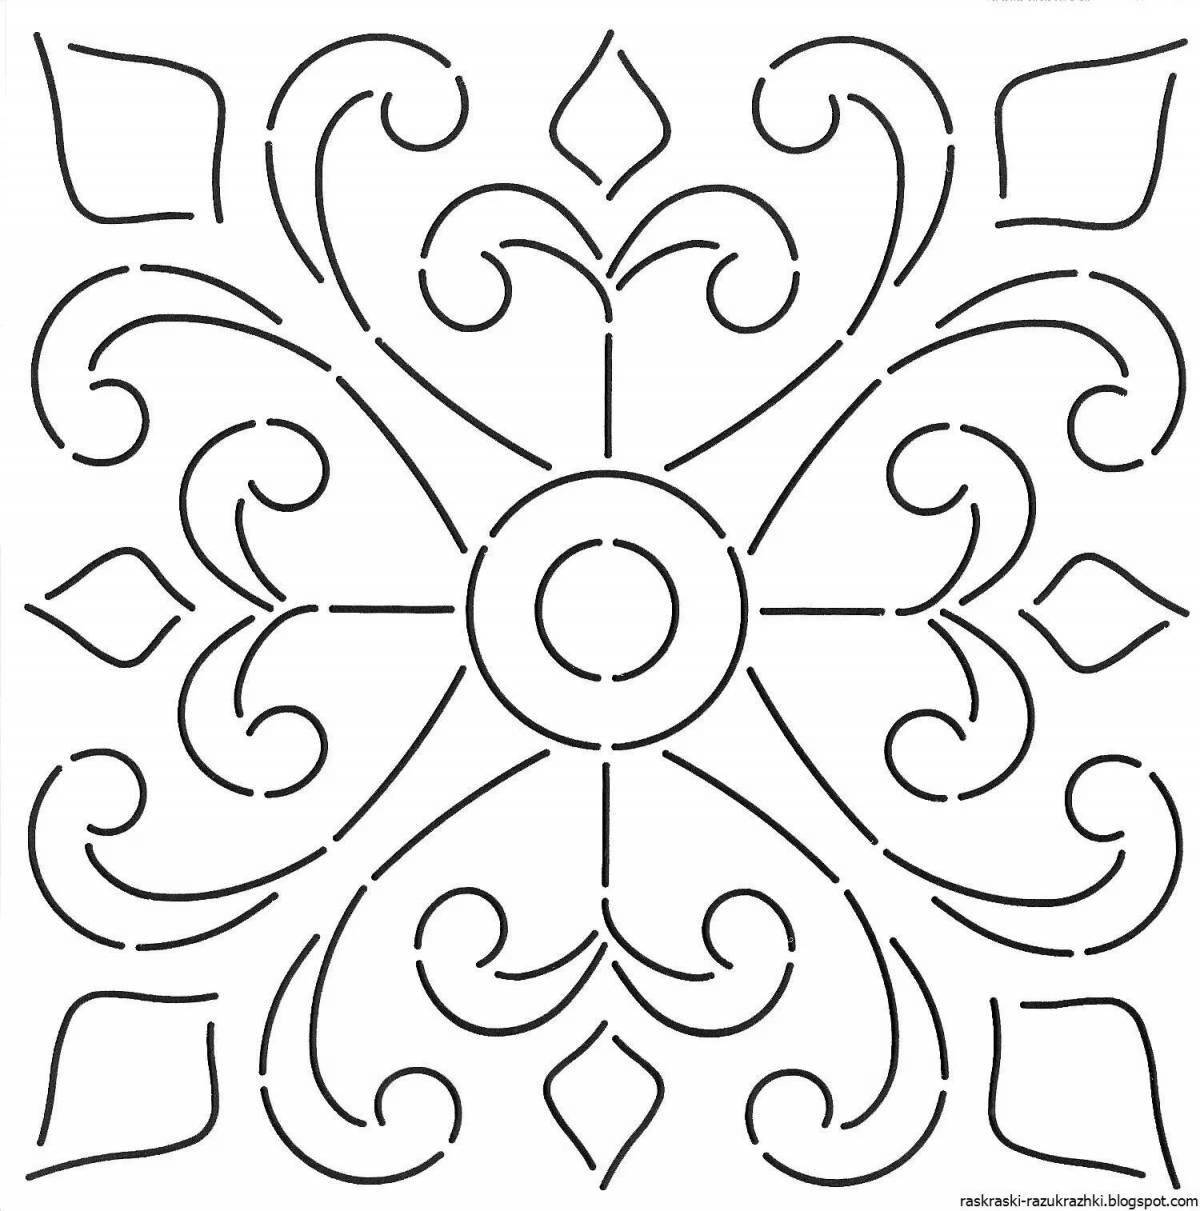 Color-filled tiles for coloring pages